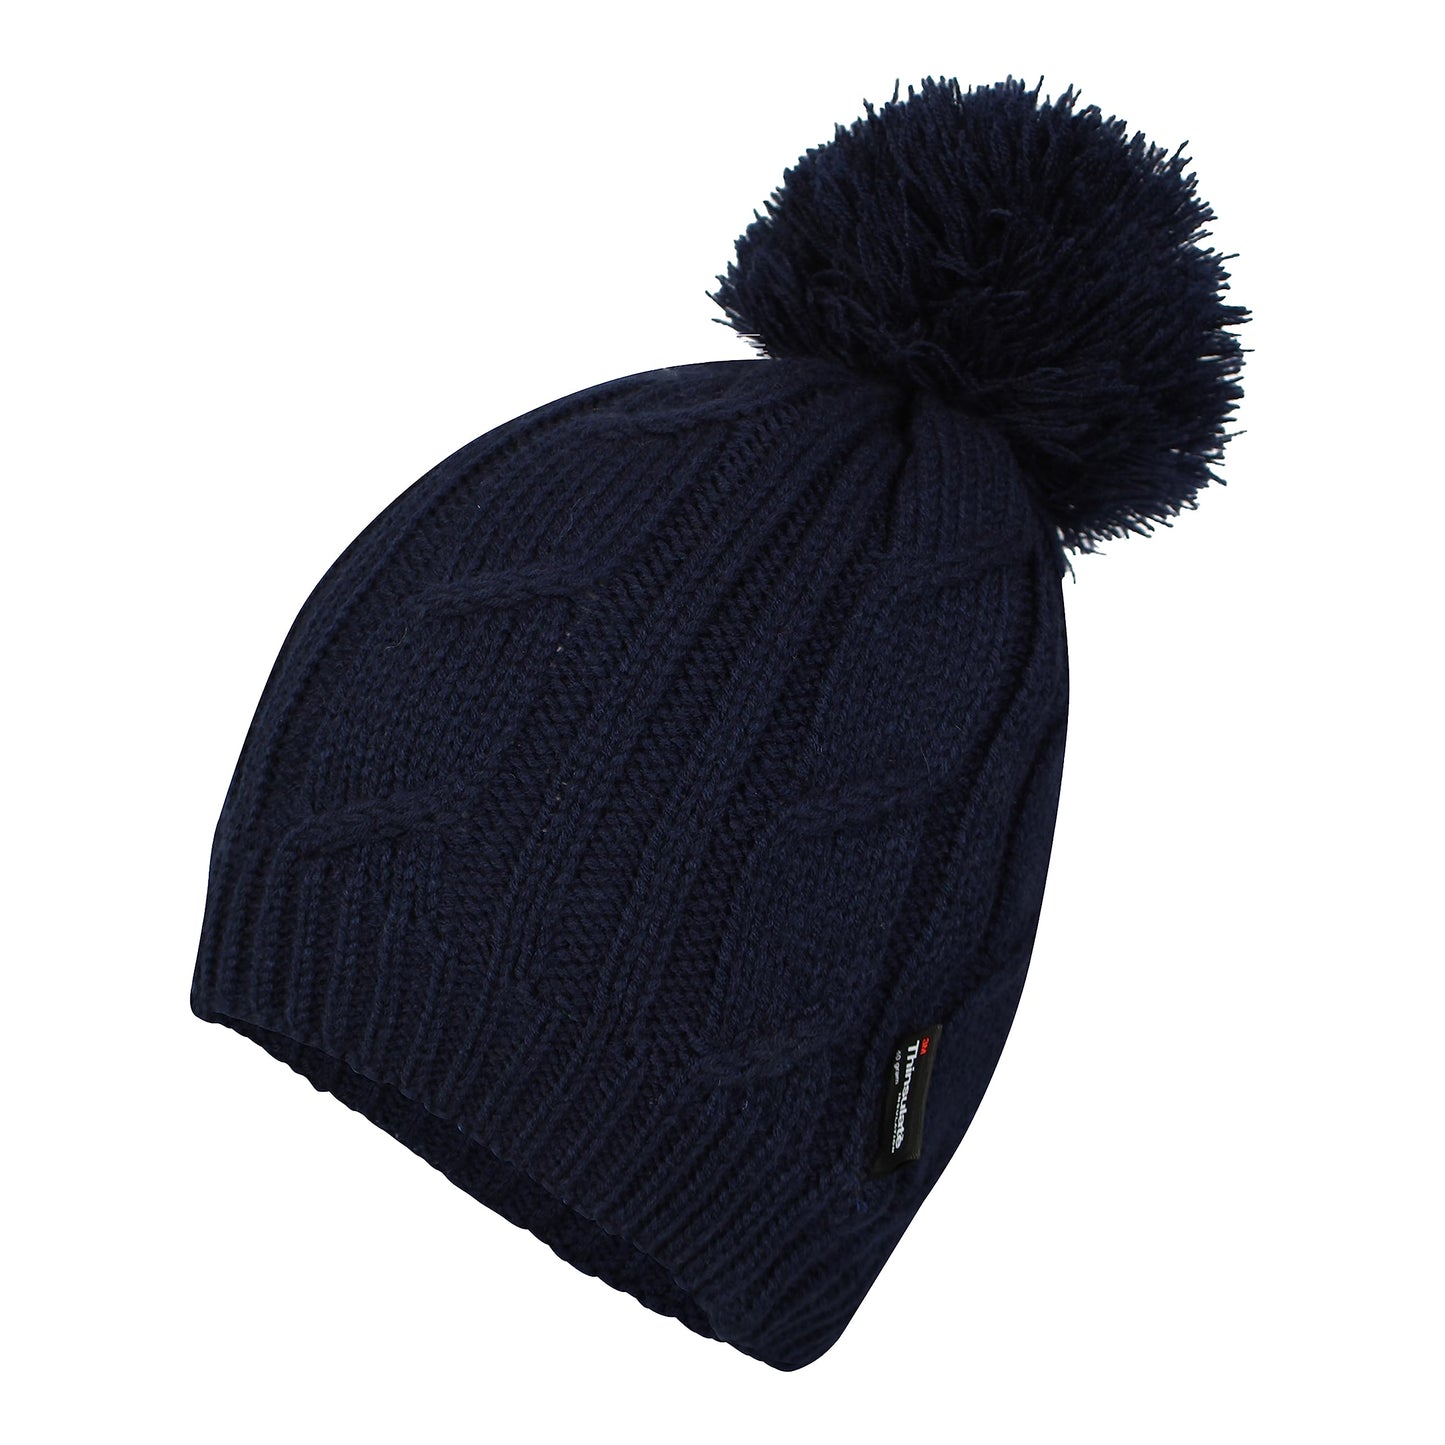 Women's Warm Chunky Beanie Hat Waterproof Cable Knit 3M Thinsulate Pom Pom Bobble. Buy now for £7.00. A Hats by Sock Stack. 3M, Beanie Hat, Bobble, Cable Knit, chunky, Ear Warmer, everyday wear, fleece, formal wear, hat, Hats, Insulation Hat, ladies, Line